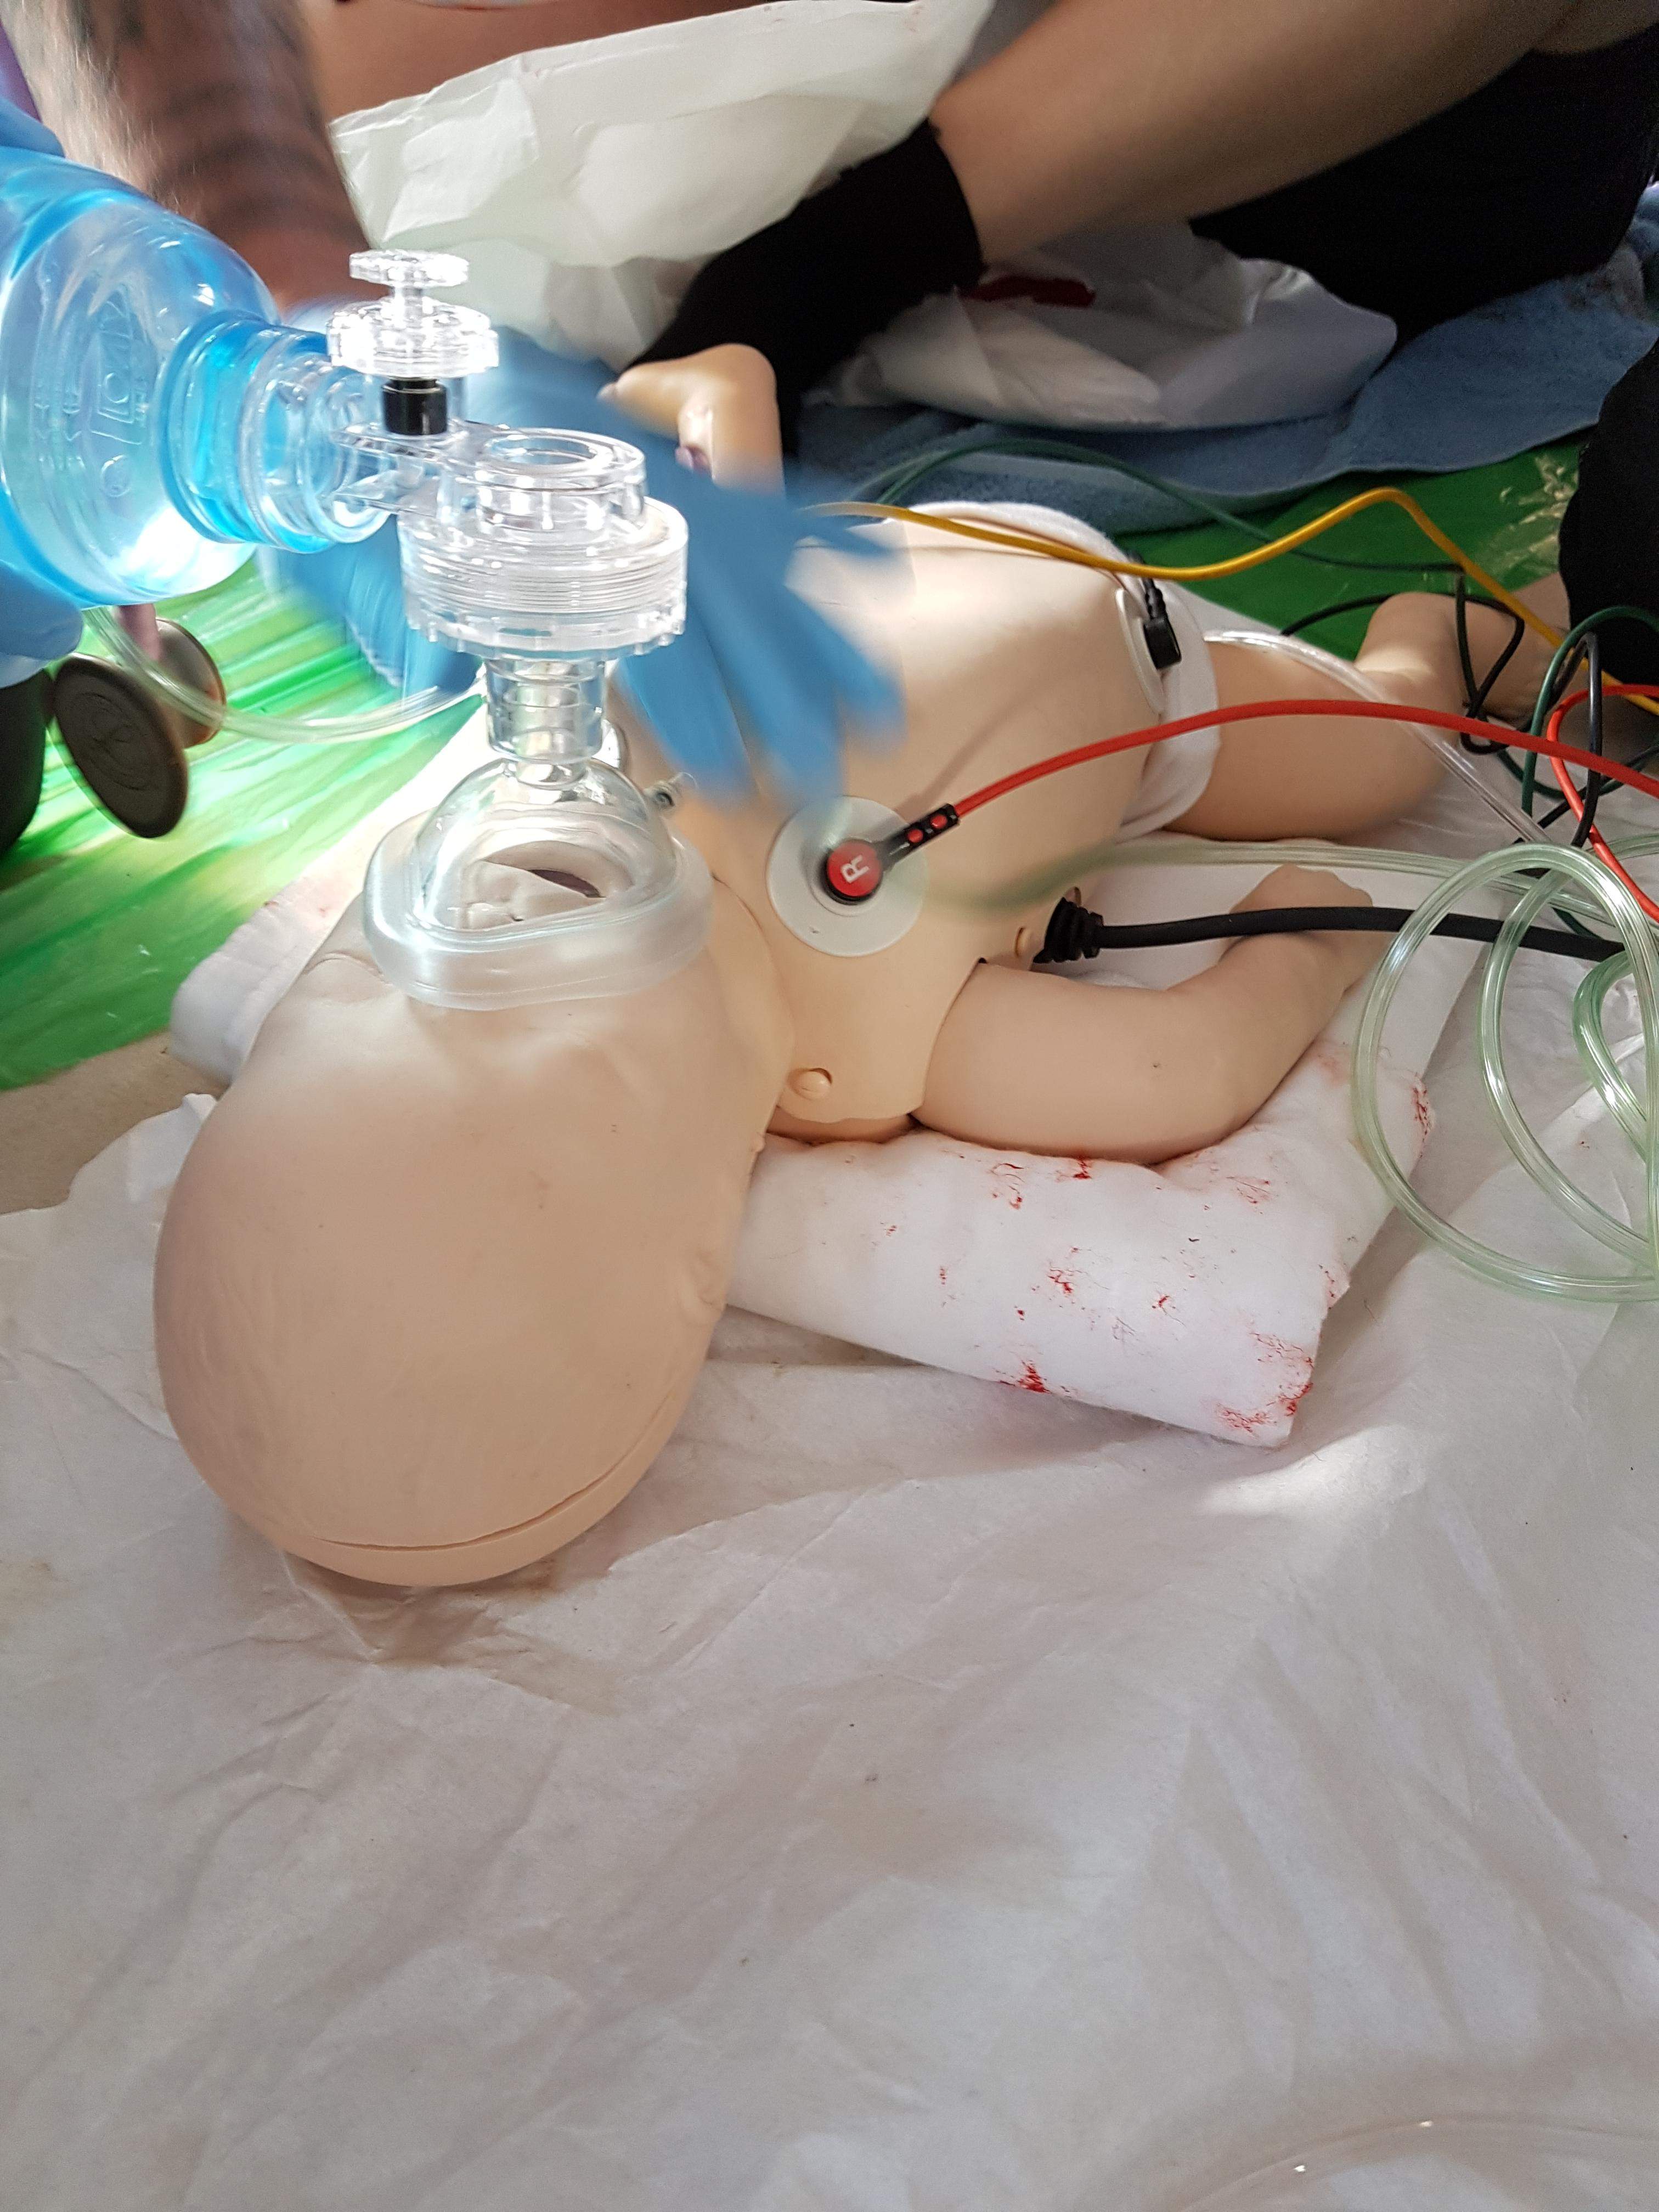 Level 4 Immediate Life Support (ILS) course 2 April 2022